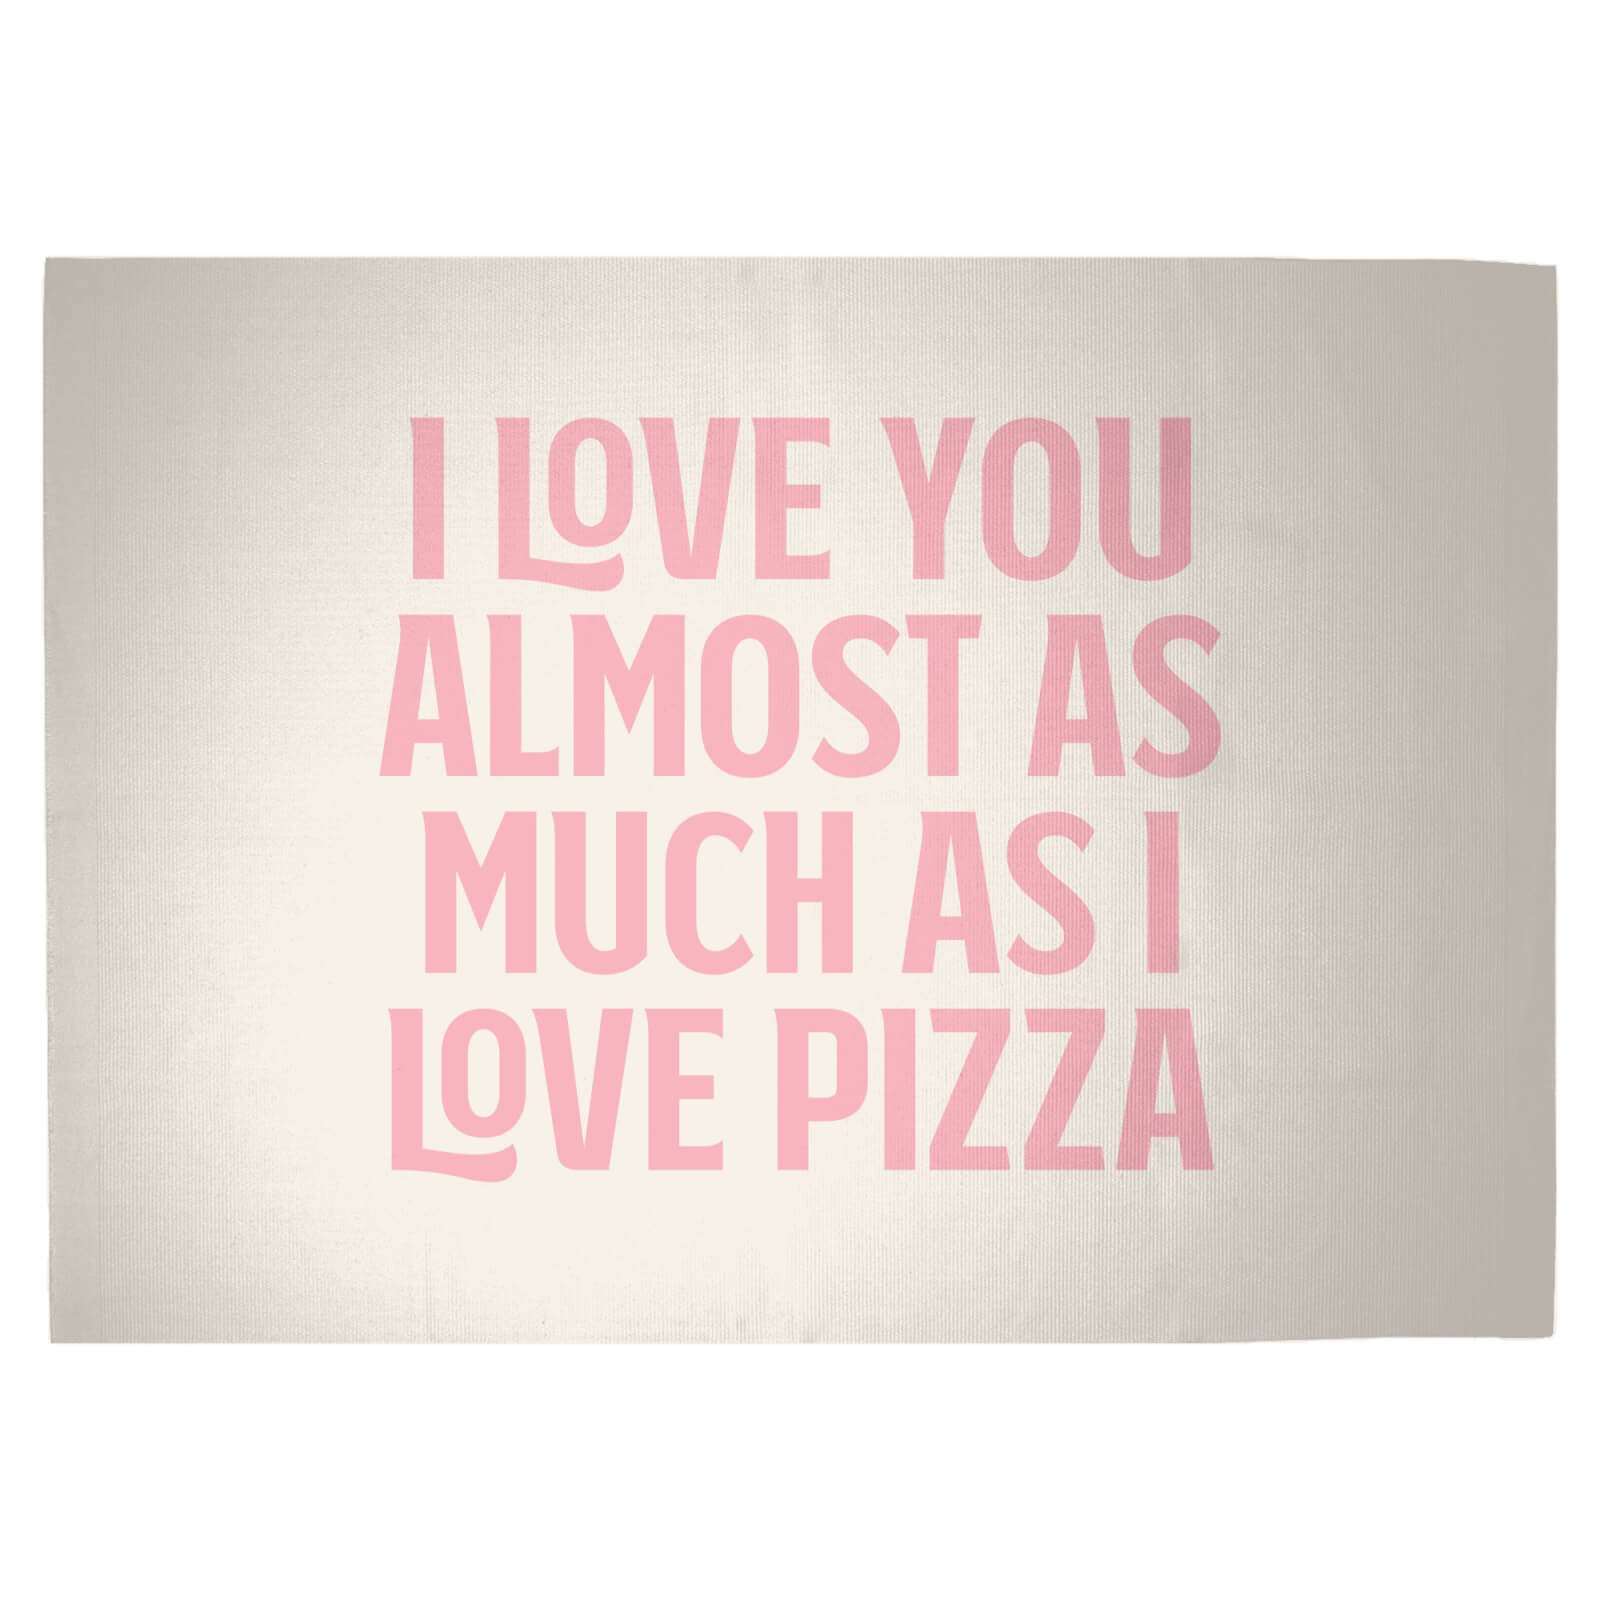 I Love You Almost As Much As I Love Pizza Woven Rug - Large